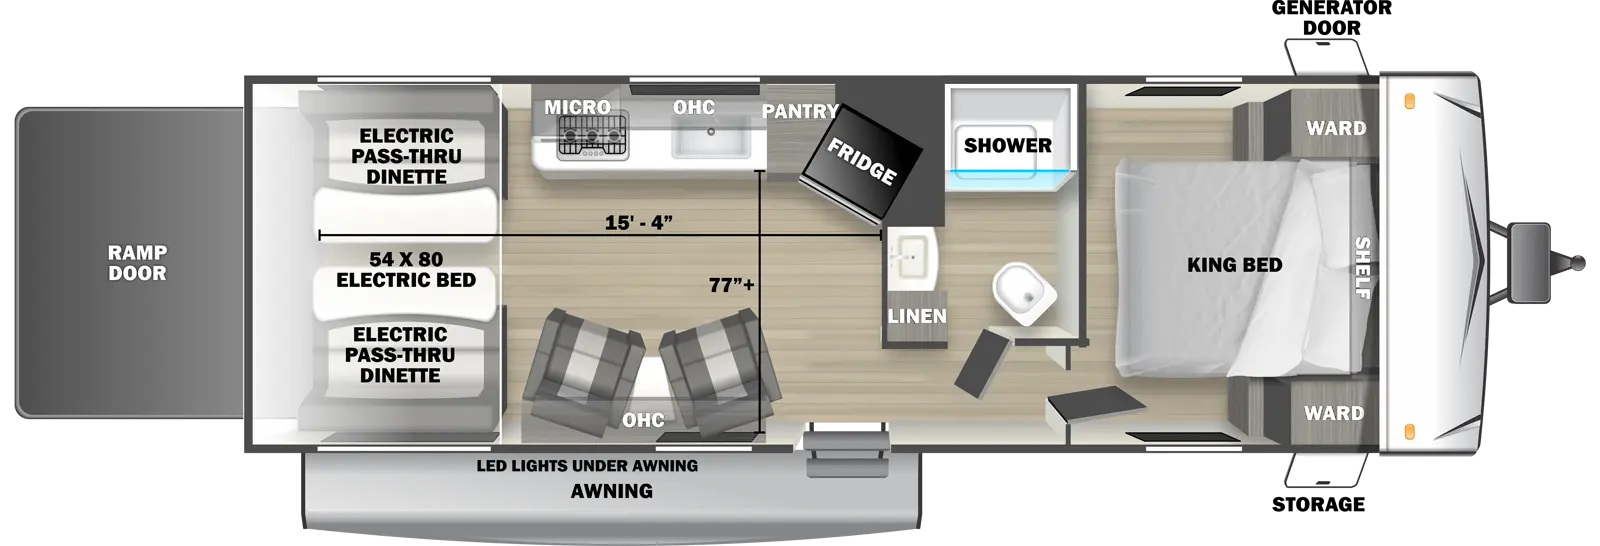 The 2500SRS travel trailer has no slide outs, 1 entry door and 1 rear ramp door. Exterior features include an awning with LED lights, front door side storage and front off-door side generator door. Interior layout from front to back includes: front bedroom with foot-facing King bed, shelf over the bed, and front corner wardrobes; off-door side bathroom with shower, linen storage, toilet and single sink vanity; off-door side kitchen with overhead microwave, overhead cabinets, pantry, stovetop and angled refrigerator; 2 door side recliners with end table; and rear electric 60 x 80 bed with opposing side electric pass-through dinette. Cargo length from rear of unit to kitchen wall is 15 ft. 4 in. Cargo width from kitchen countertop to door side wall is 77 inches.